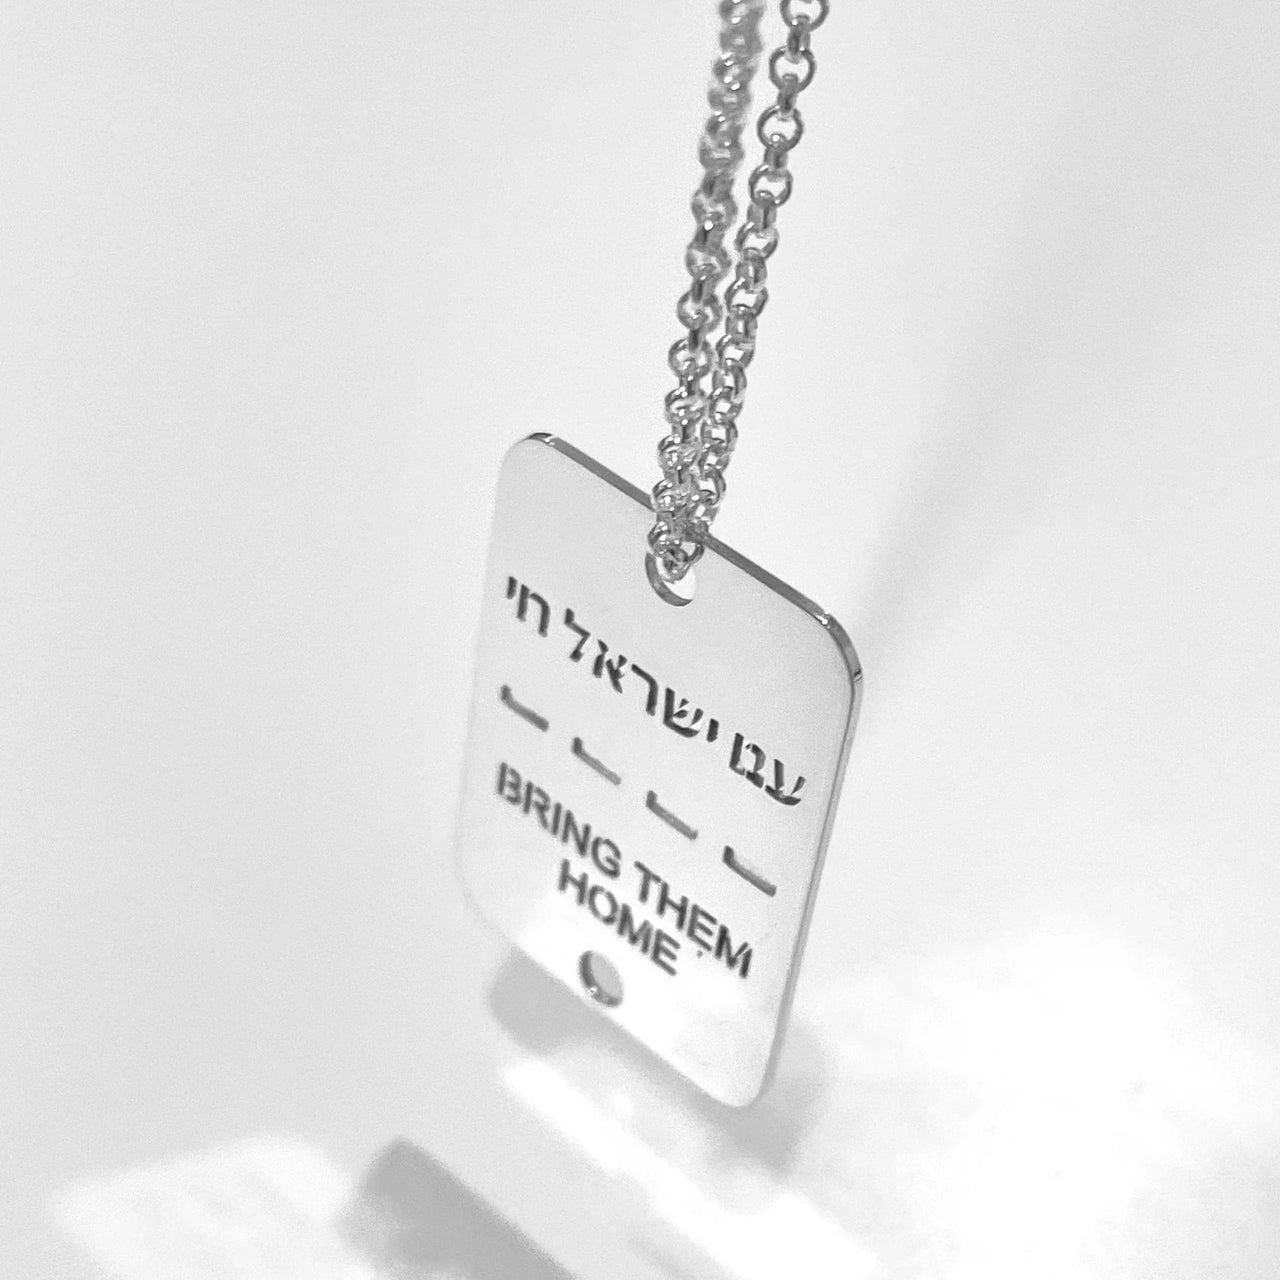 Miriam Merenfeld Jewelry Necklaces Bring Them Home Tag Necklace - Sterling Silver or Gold Vermeil - 100% of Profits Donated